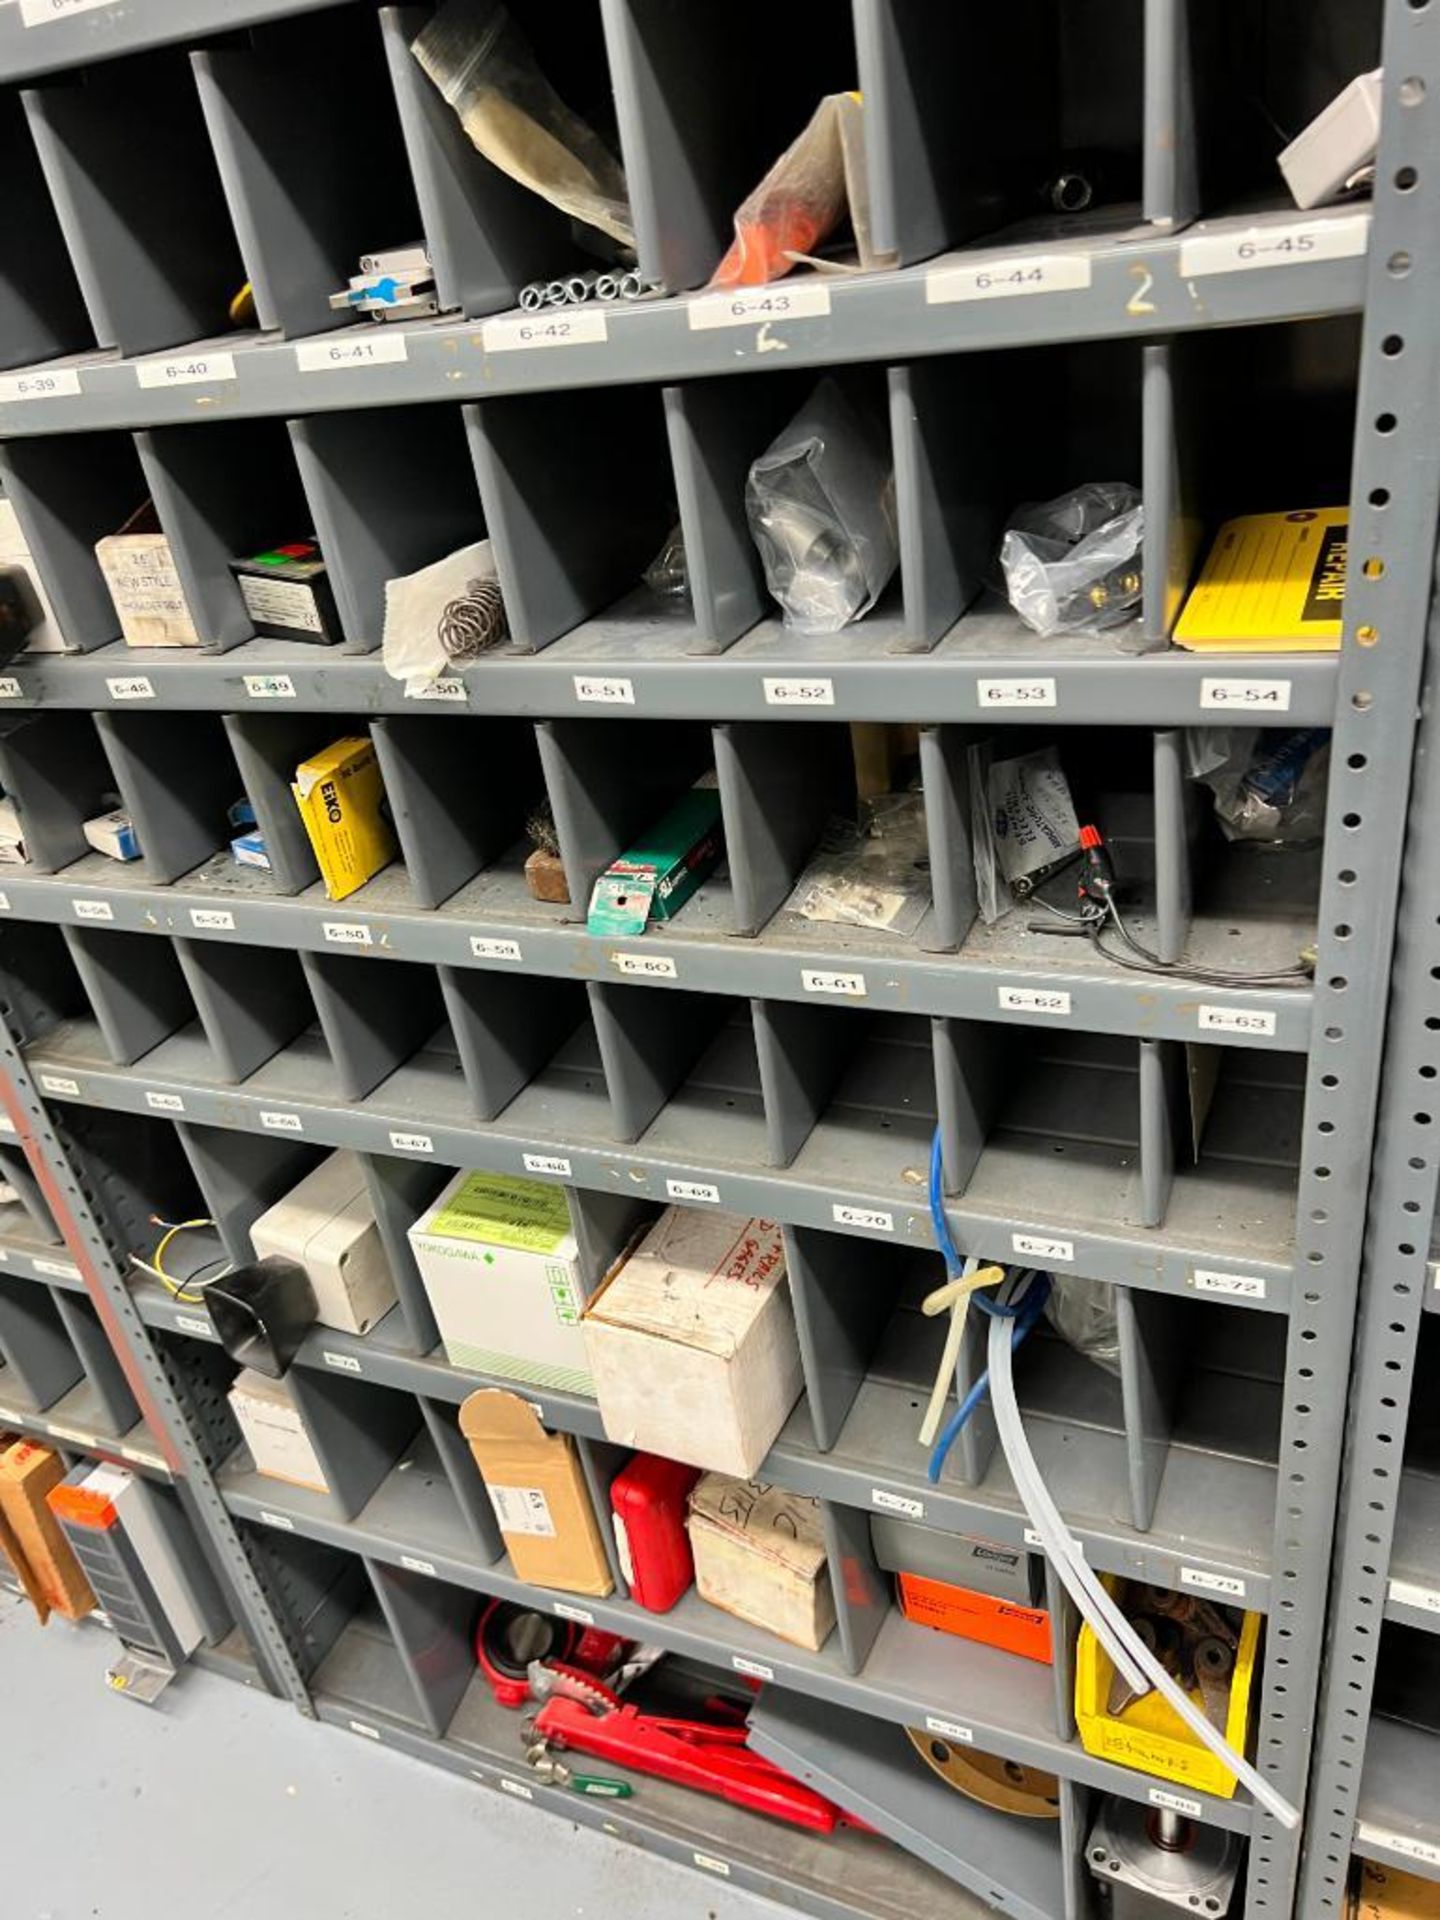 (28) Shelves of Assorted Parts, VERY LARGE LOT Consisting of MRO, Drives, Valves, PLC, Nuts, Bolts, - Image 5 of 67